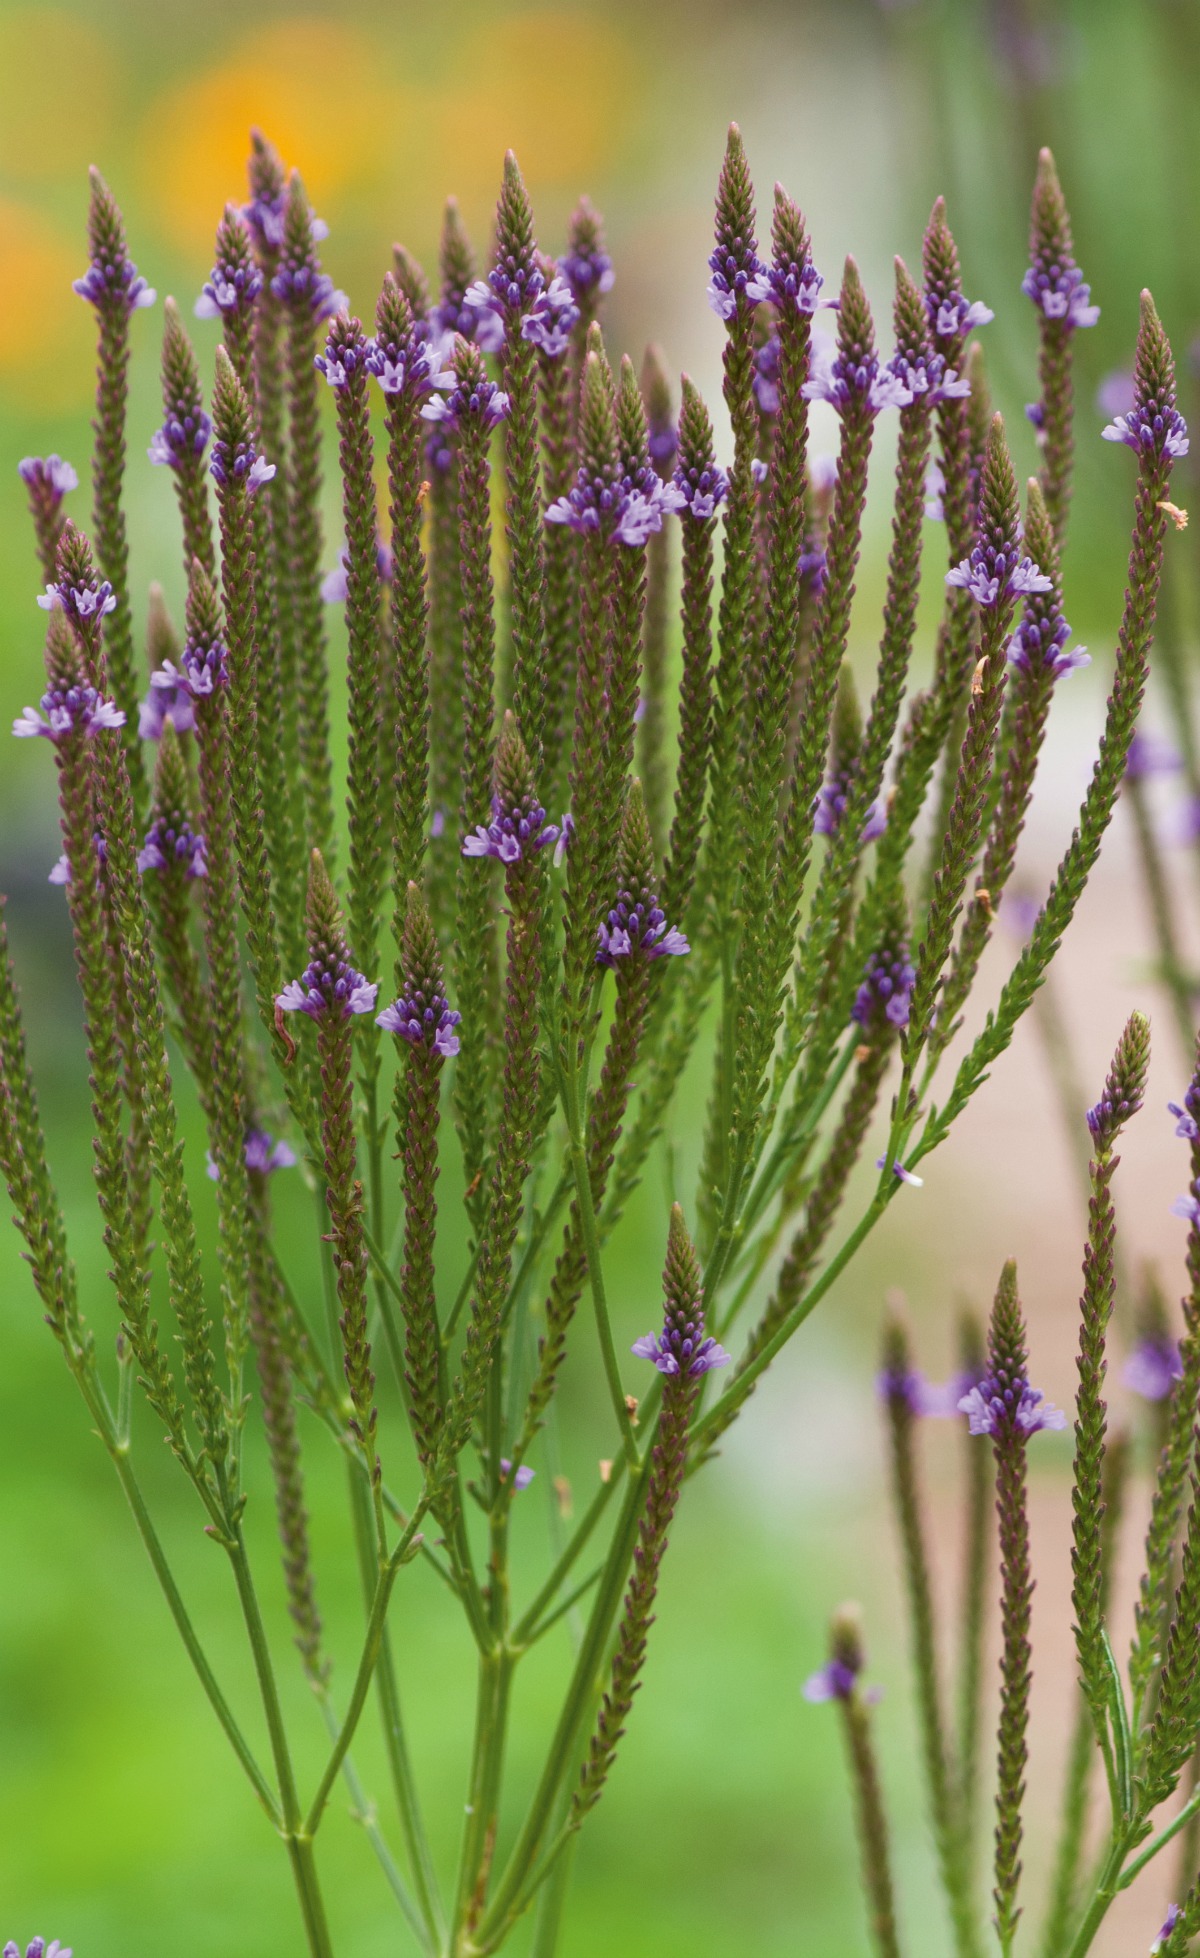 5 Herbs To Support A Body in Pain | Herbal Academy | Herbalist Maria Noël Groves teaches about herbs for pain and how they can come to our assistance during times of need.